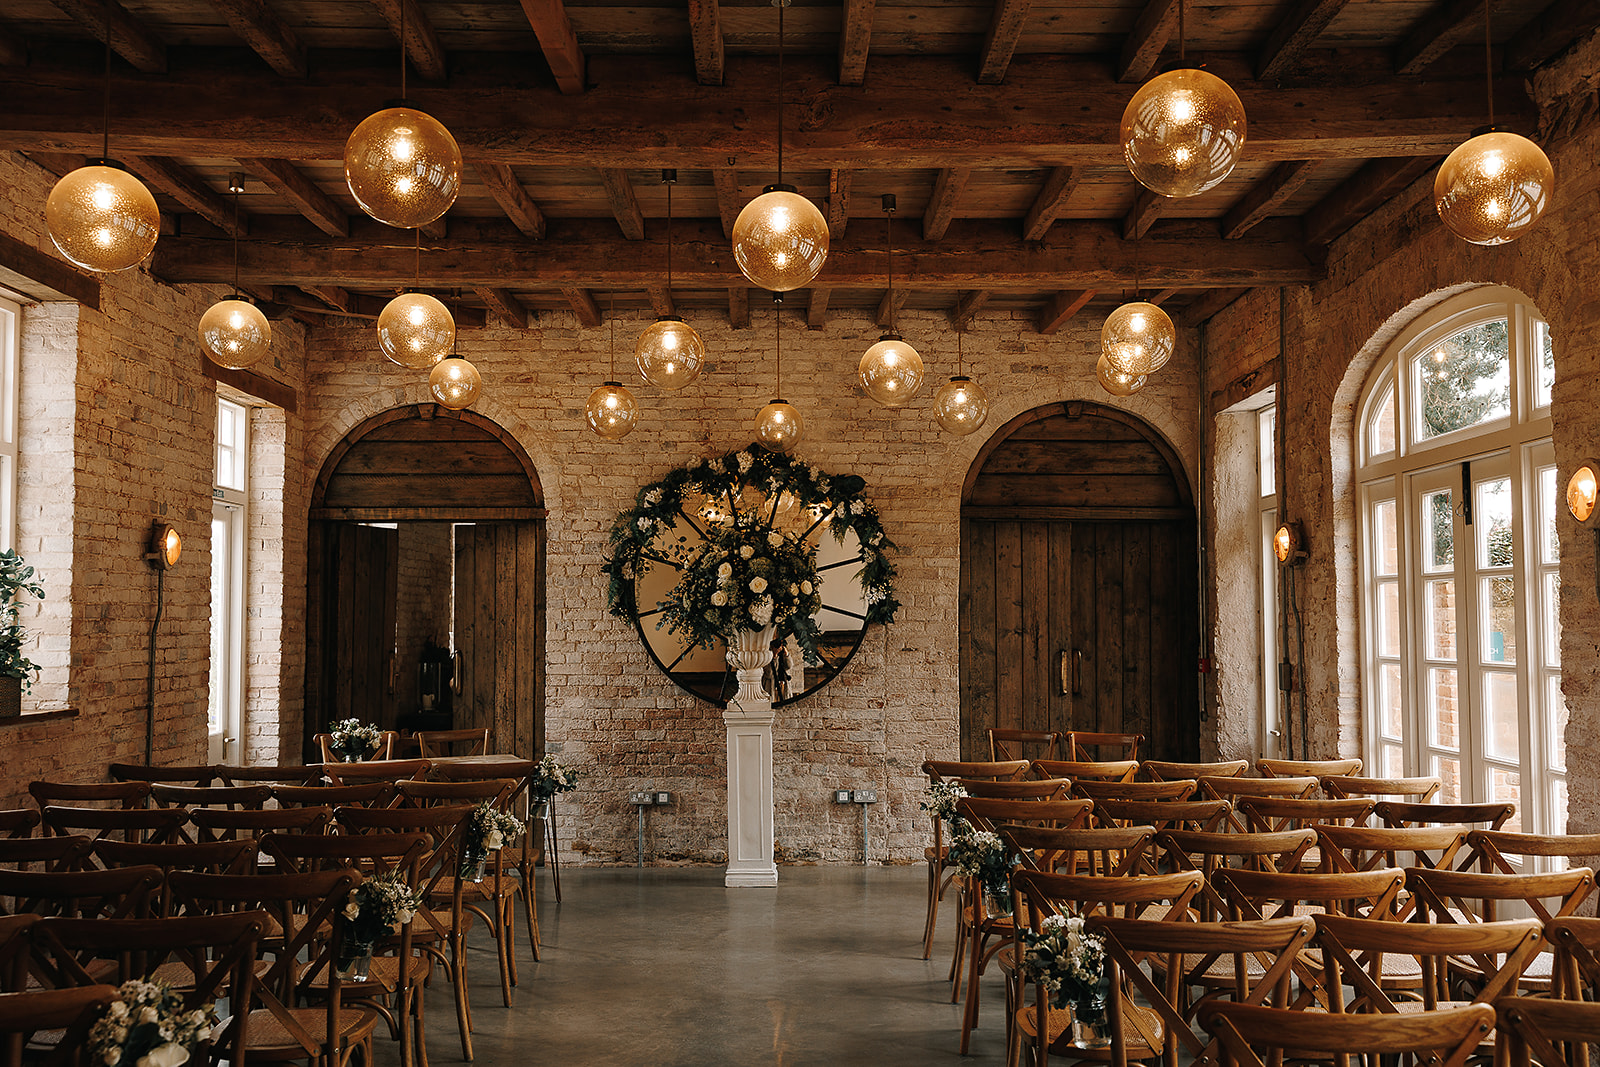 Rows of wooden chairs are lined up with spacing for an aisle to run between them inside a rustic converted coach house with exposed brick walls snd globe lights hanging from the ceiling